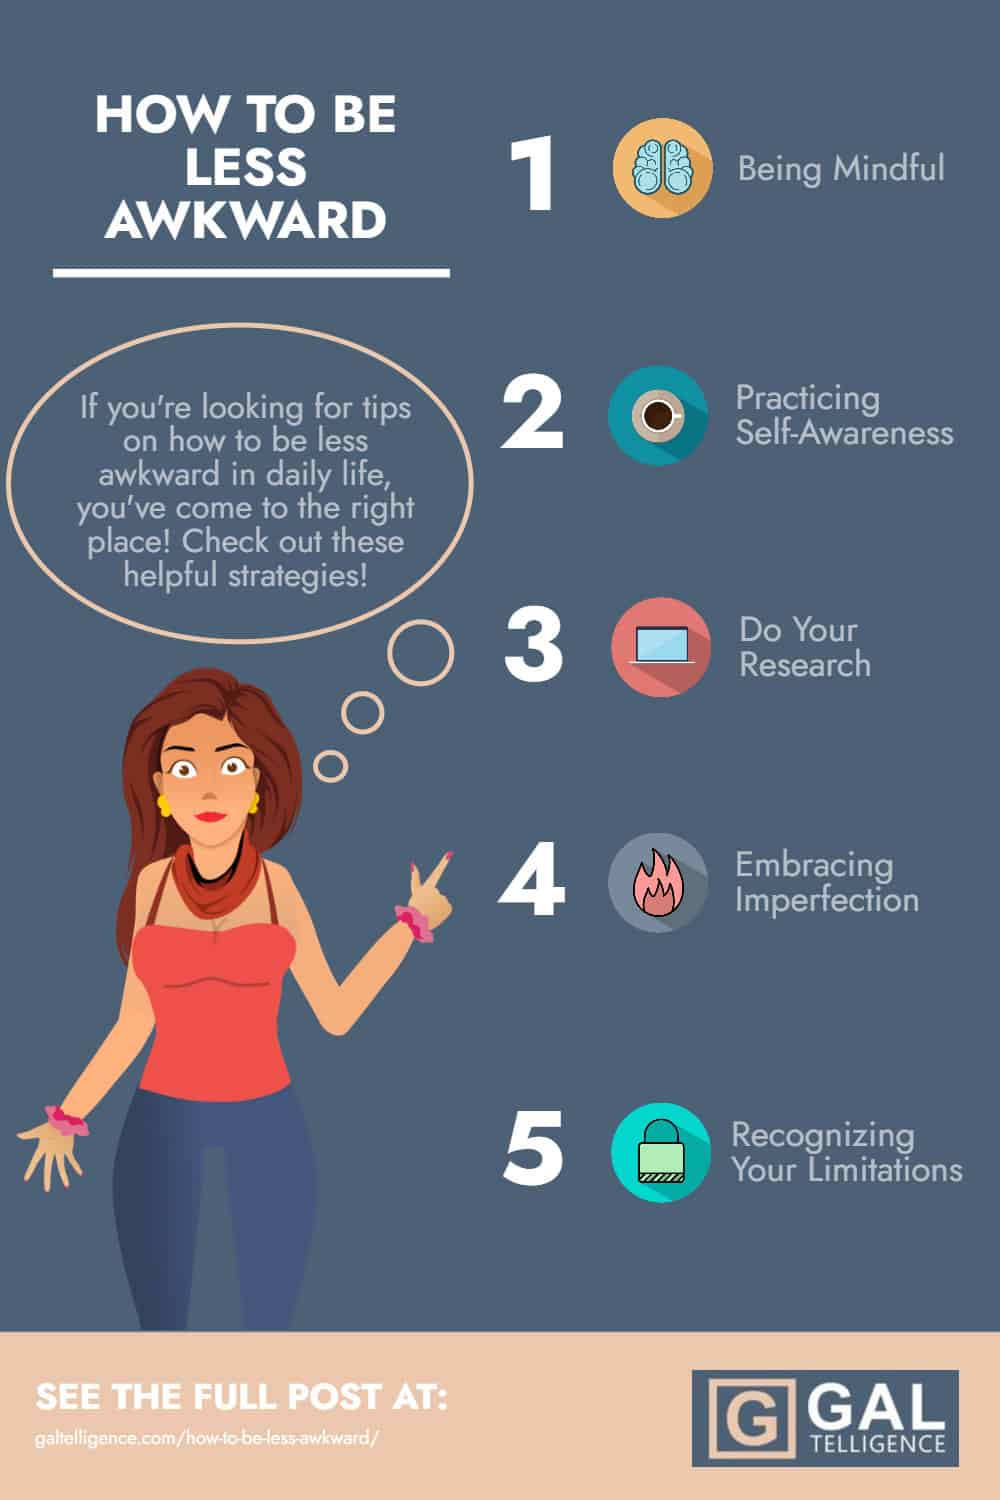 How to be less awkward - Infographic